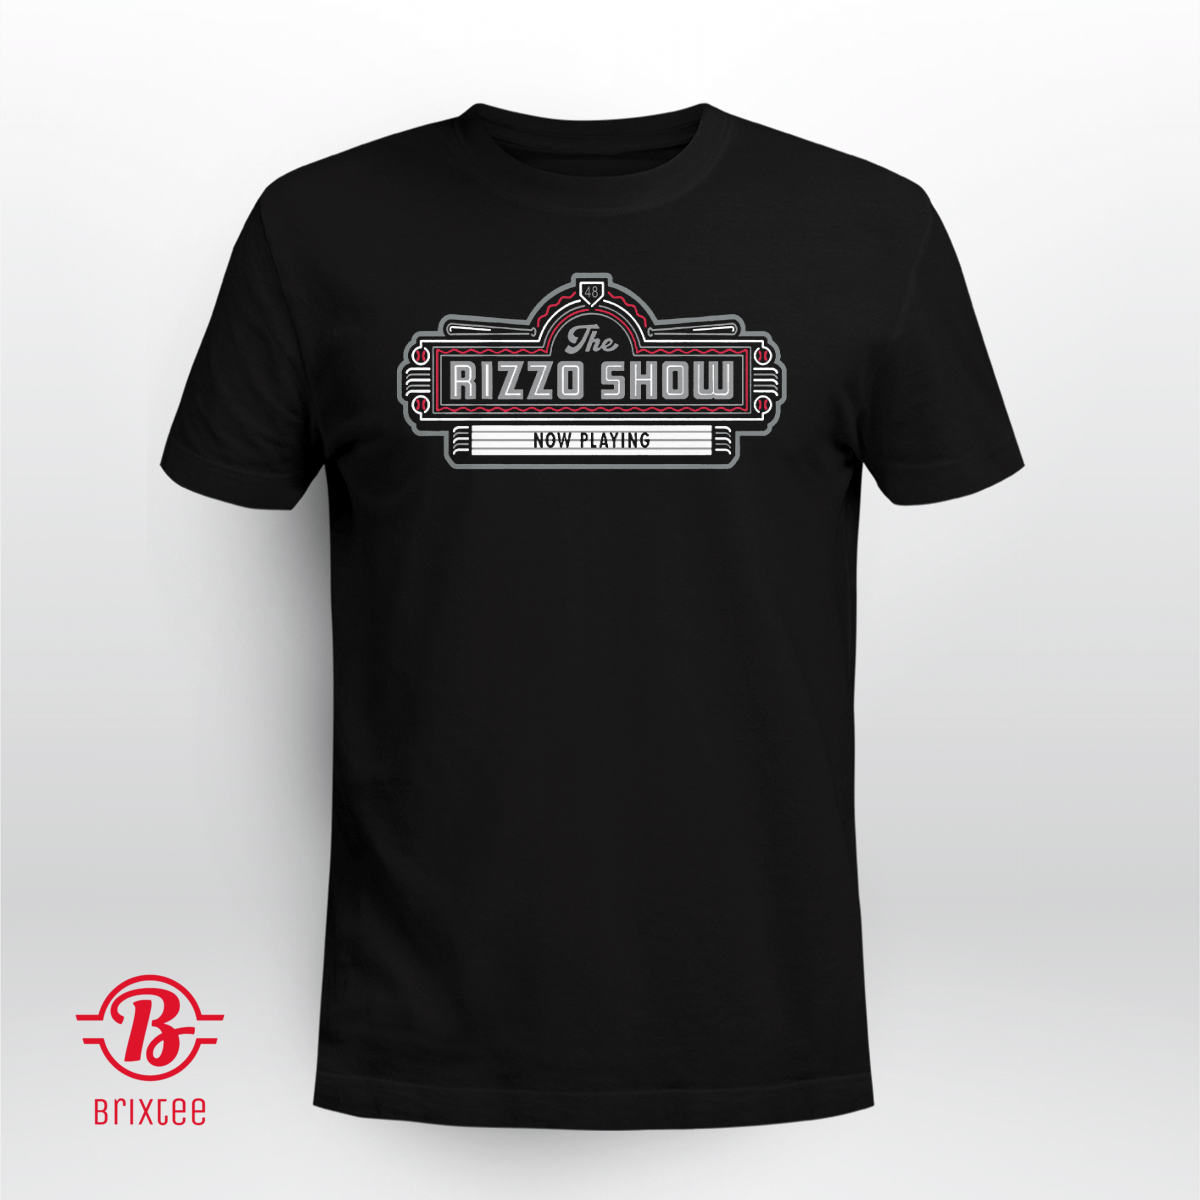 The Anthony Rizzo Show, New York Yankees - MLBPA Licensed